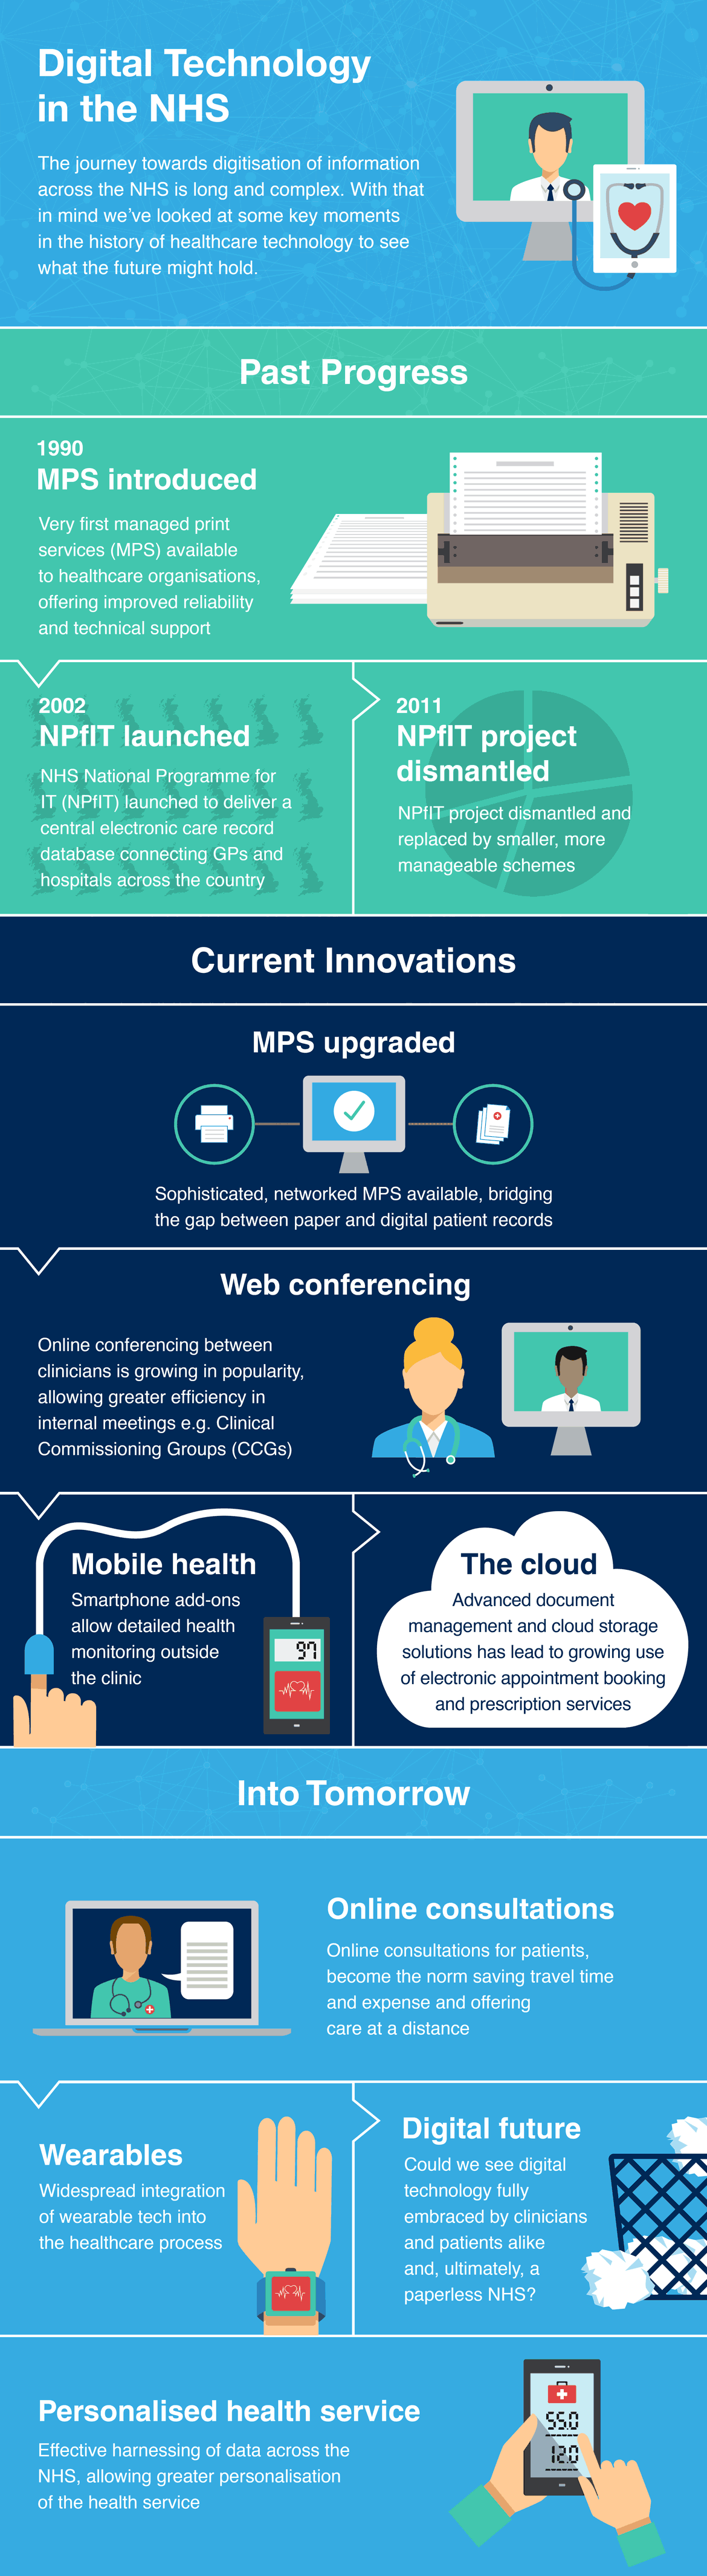 Digital Technology in the NHS infographic